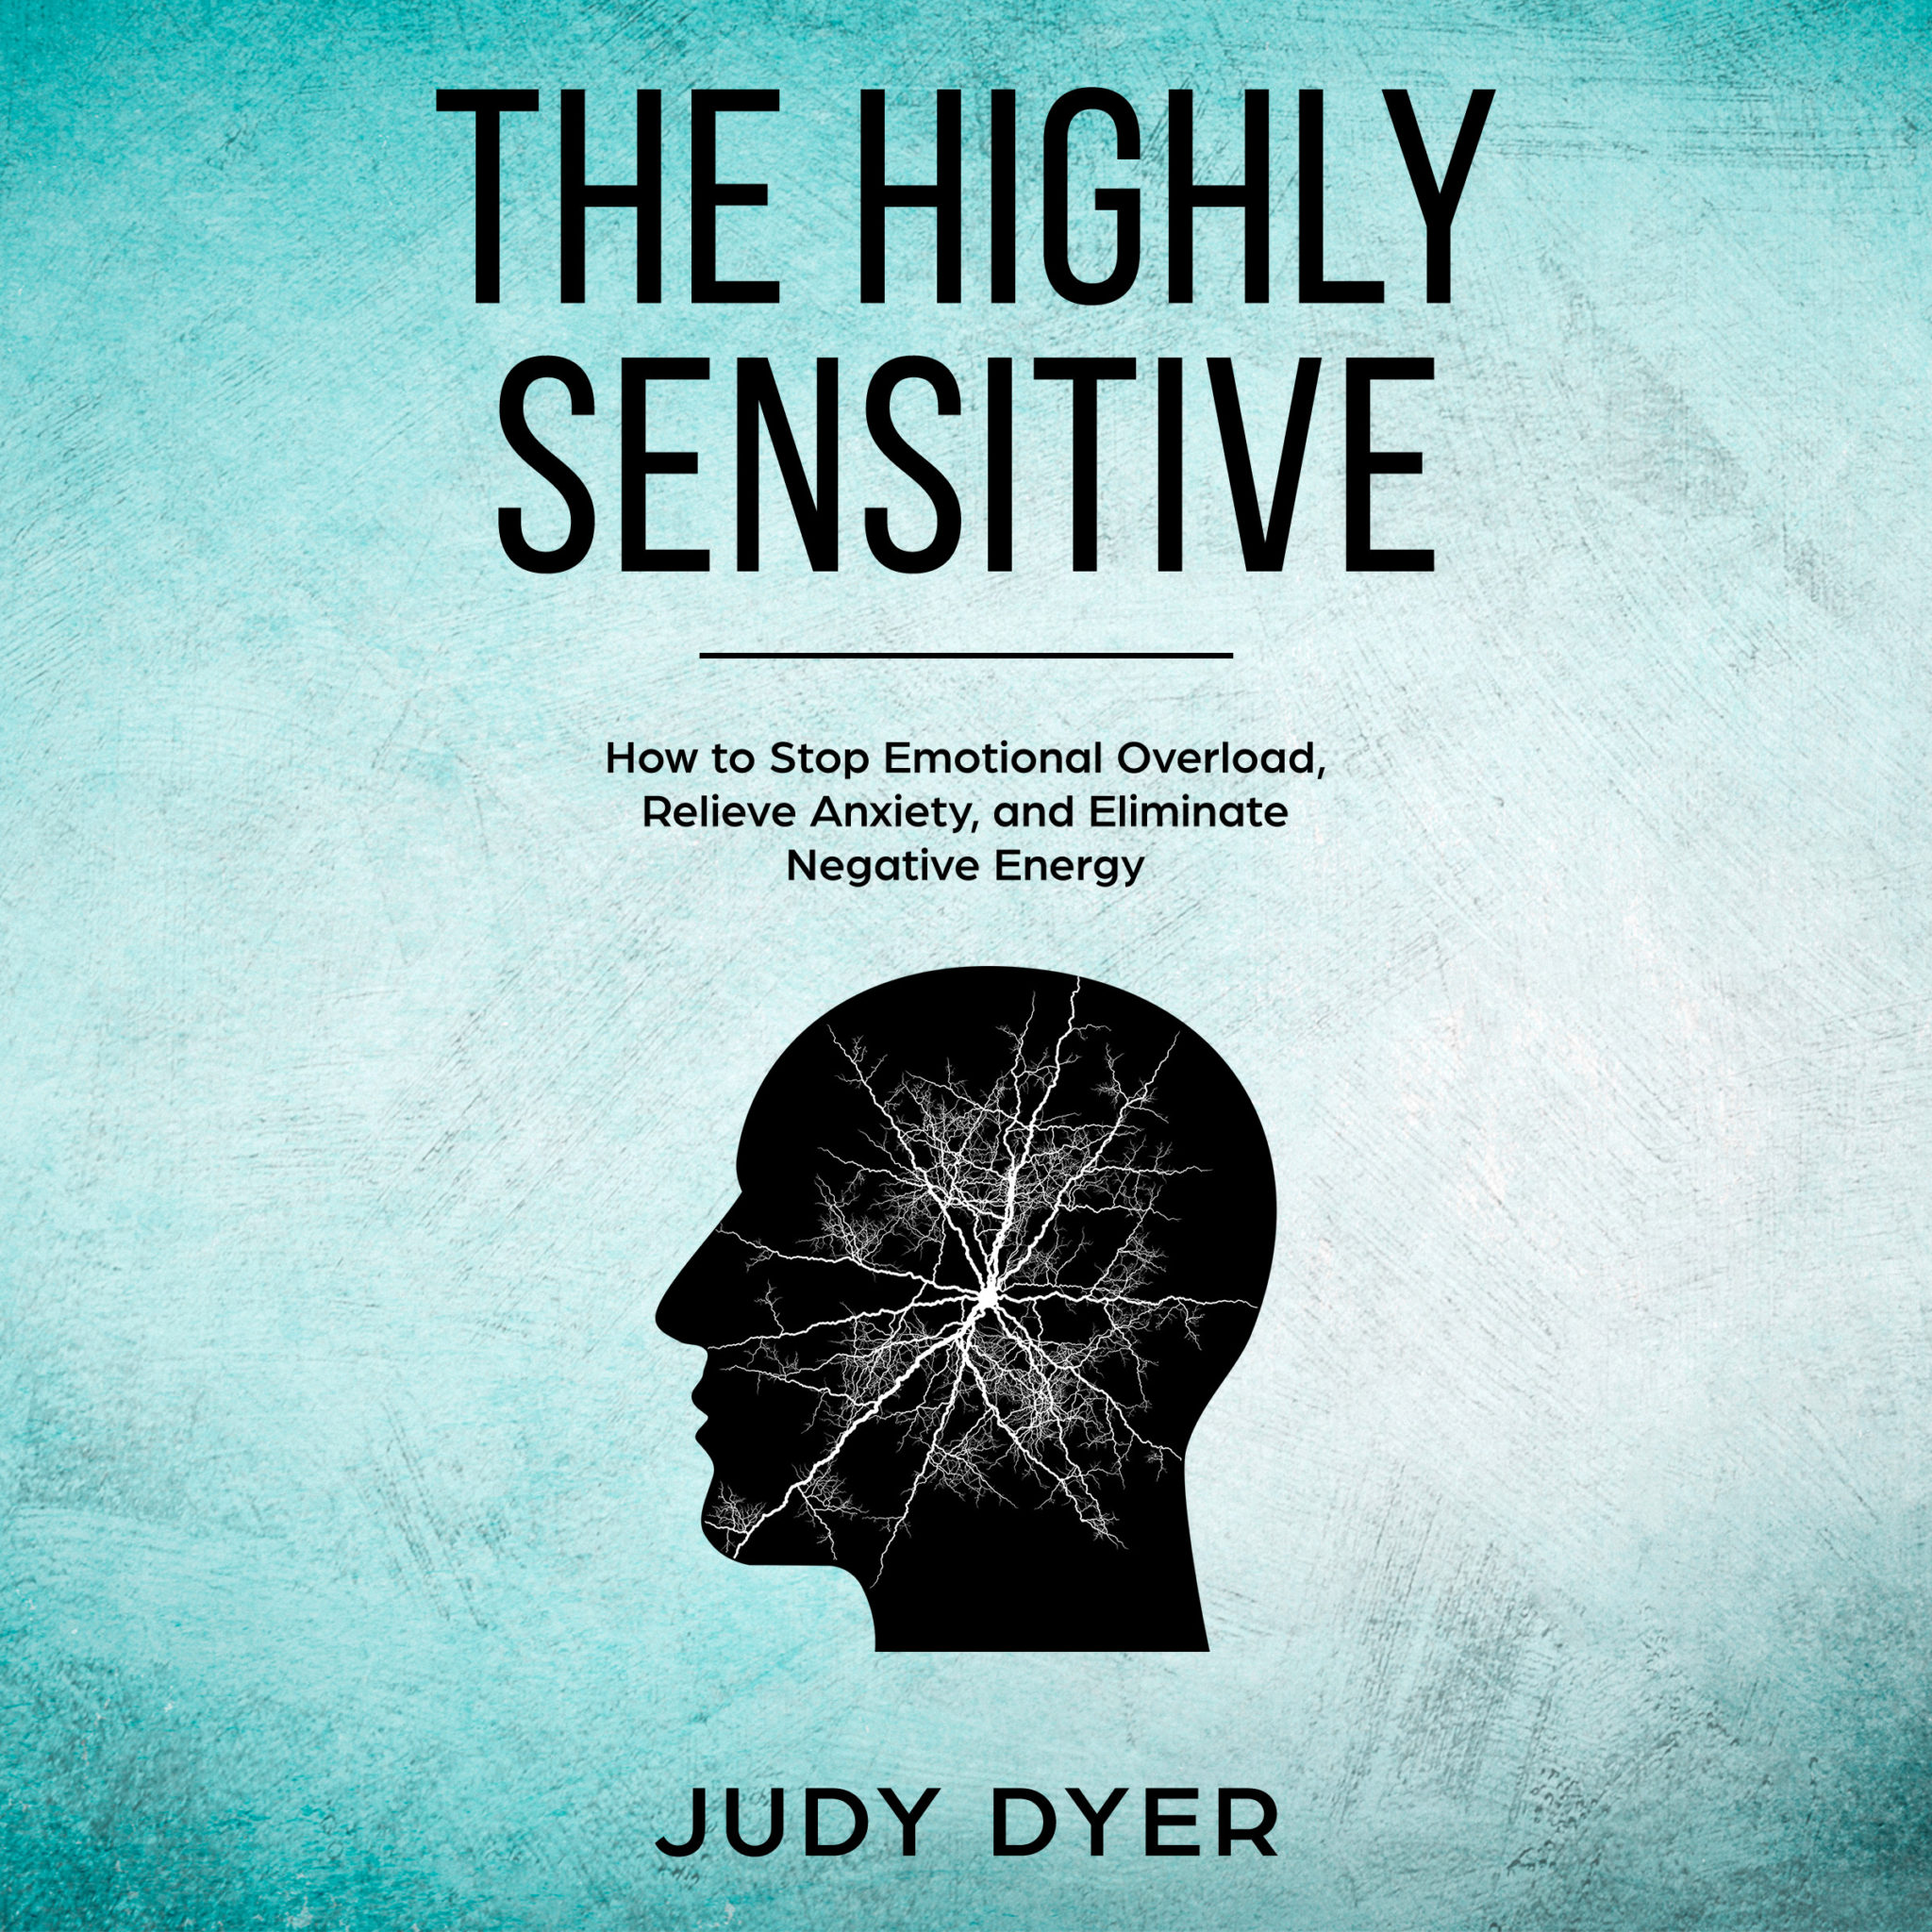 The Highly Sensitive Audiobook